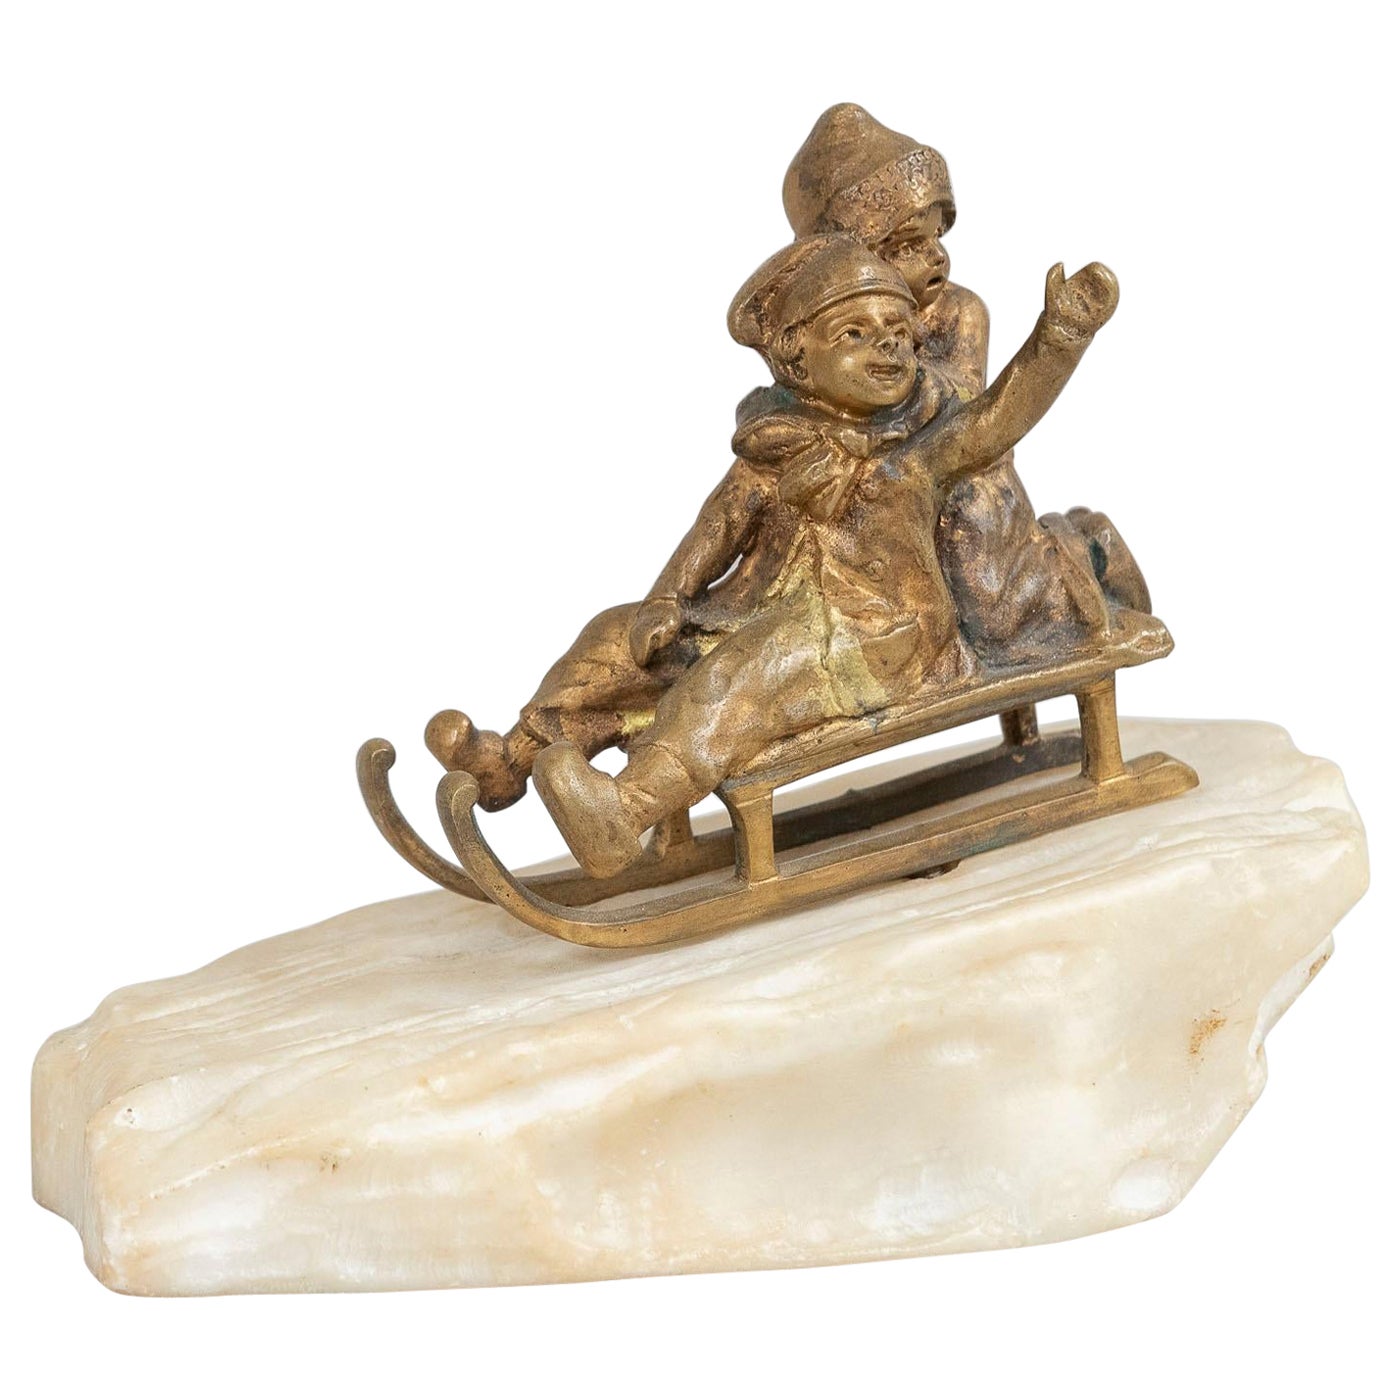 Bronze, 2 Young Children Riding on Sled on Carved White Marble Base ca. 1895